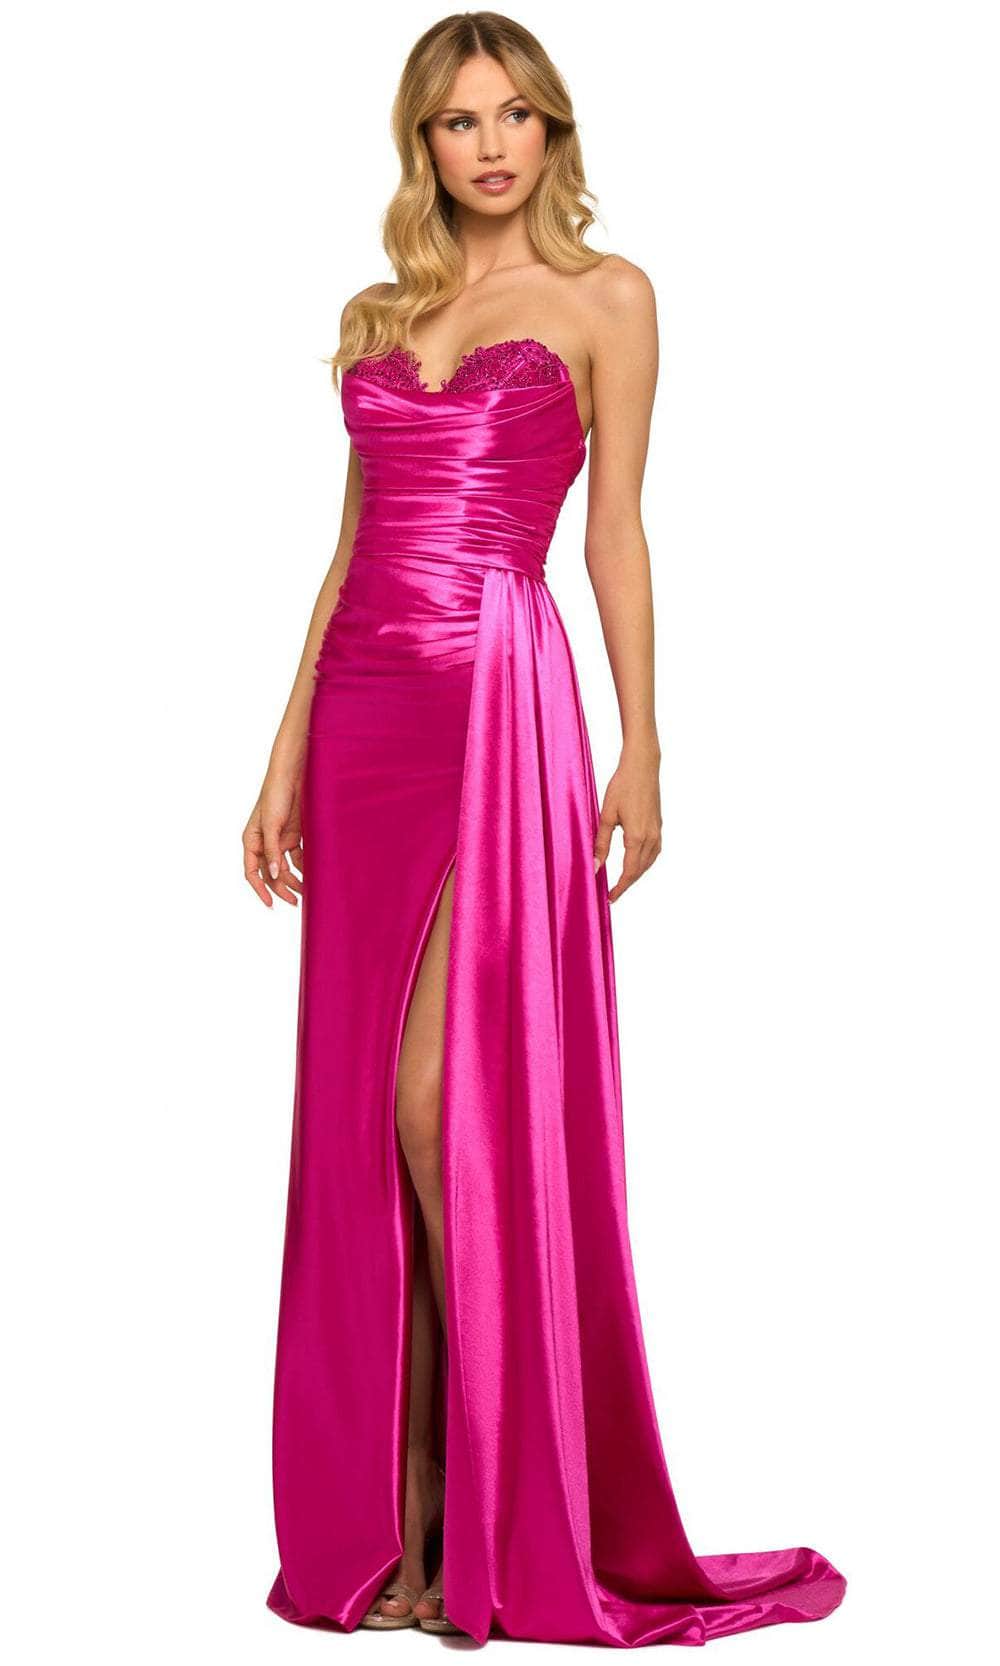 Image of Sherri Hill 55230 - Strapless Ruched Bodice Evening Gown